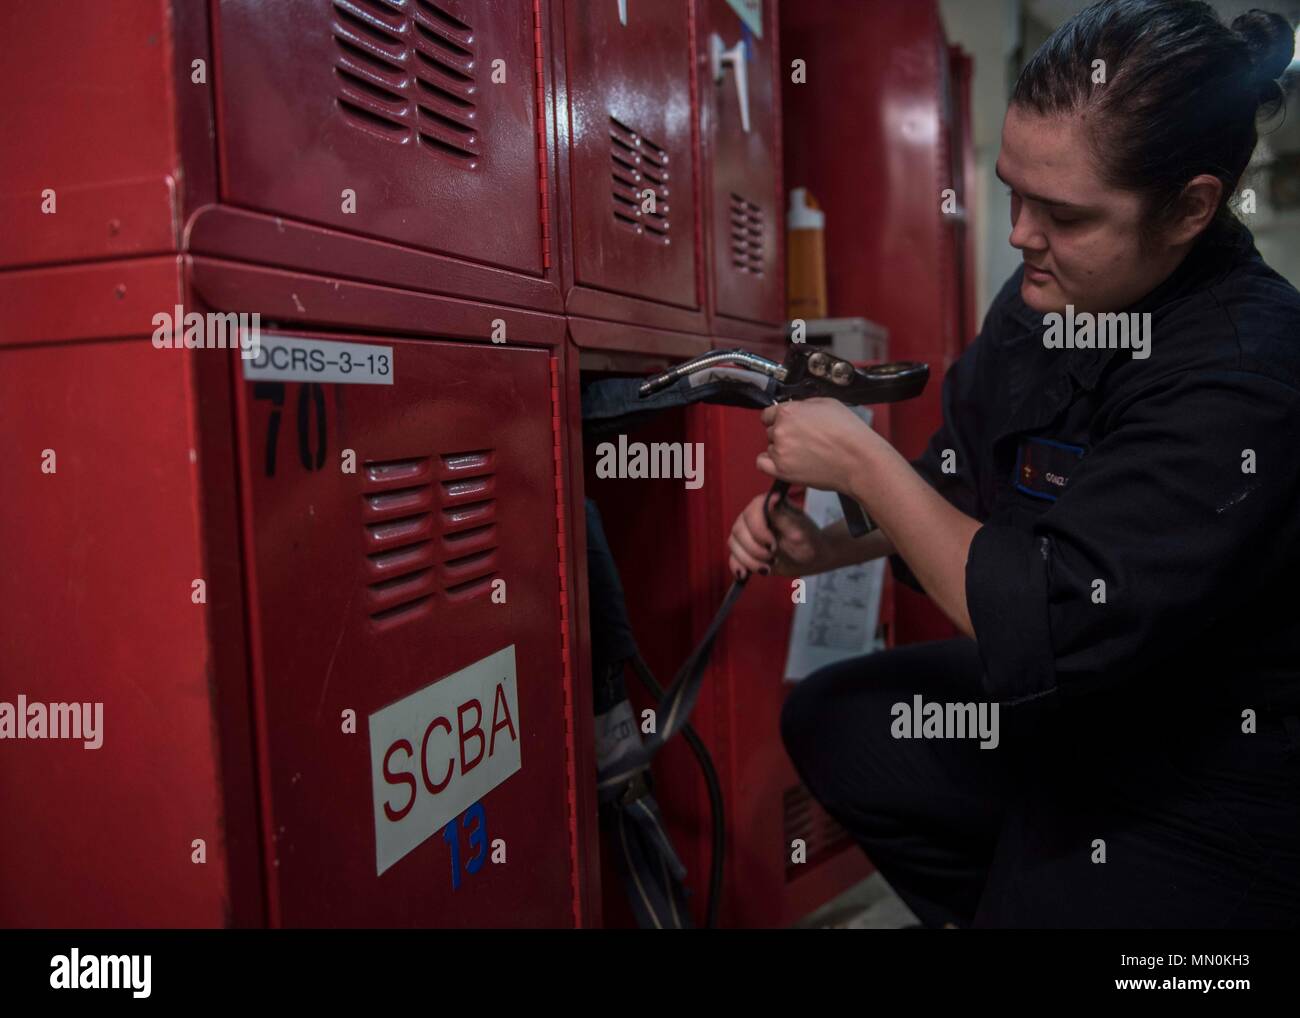 170802-N-AJ467-009 ATLANTIC OCEAN (Aug. 2, 2017) Damage Controlman Fireman Andrea Gonzales stows a self-contained breathing apparatus bottle back in its locker after maintenance aboard the aircraft carrier USS George H.W. Bush (CVN 77). The ship and its carrier strike group are conducting naval operations in the U.S. 6th Fleet area of operations in support of U.S. national security interests in Europe and Africa. (U.S. Navy photo by Mass Communication Specialist Seaman Darien Weigel/Released) Stock Photo